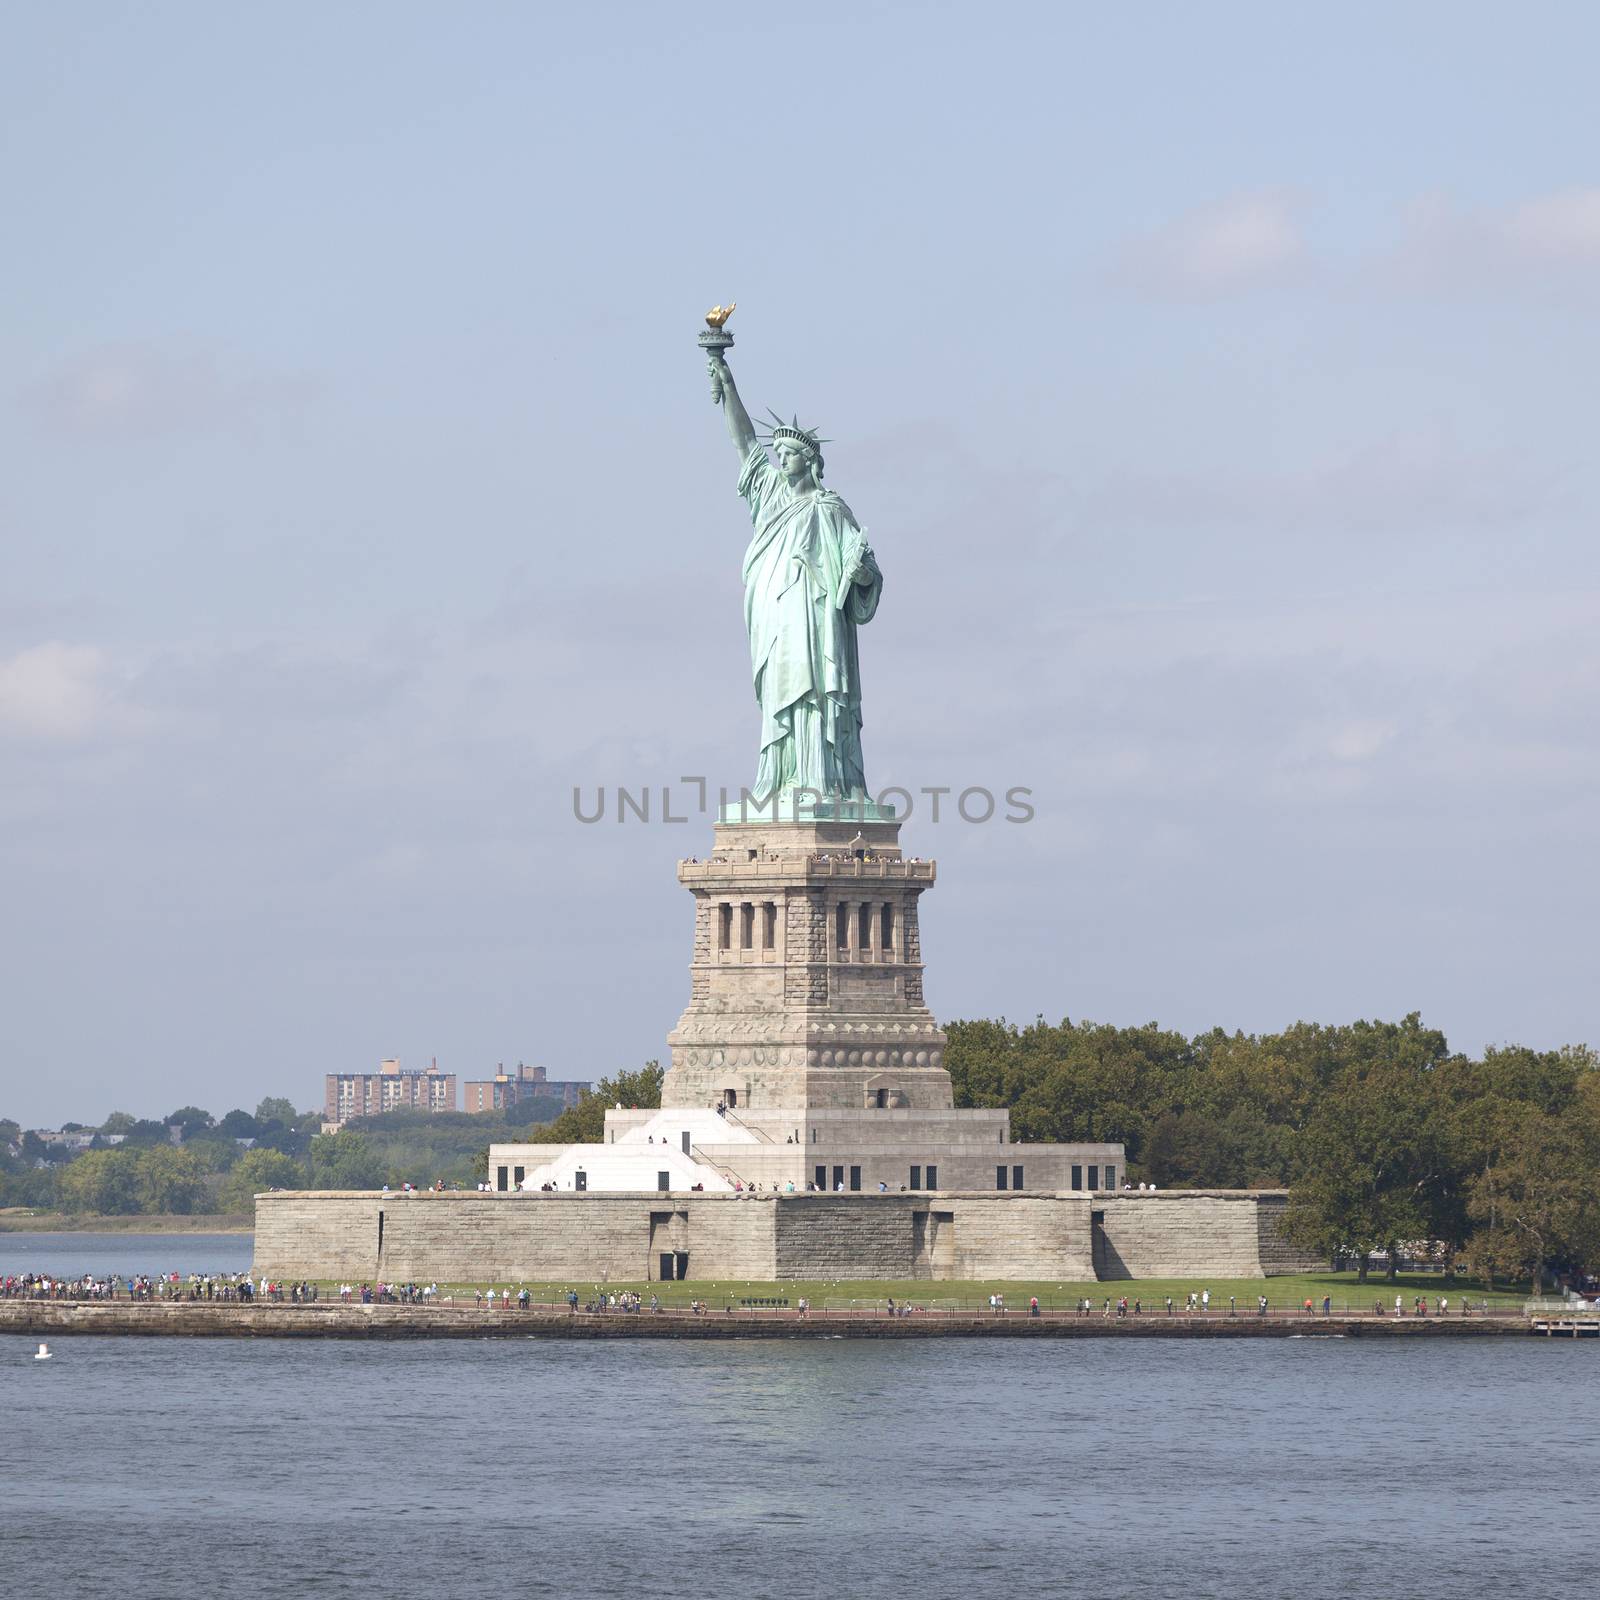 statue of miss liberty in new york city on sunny day with blue sky